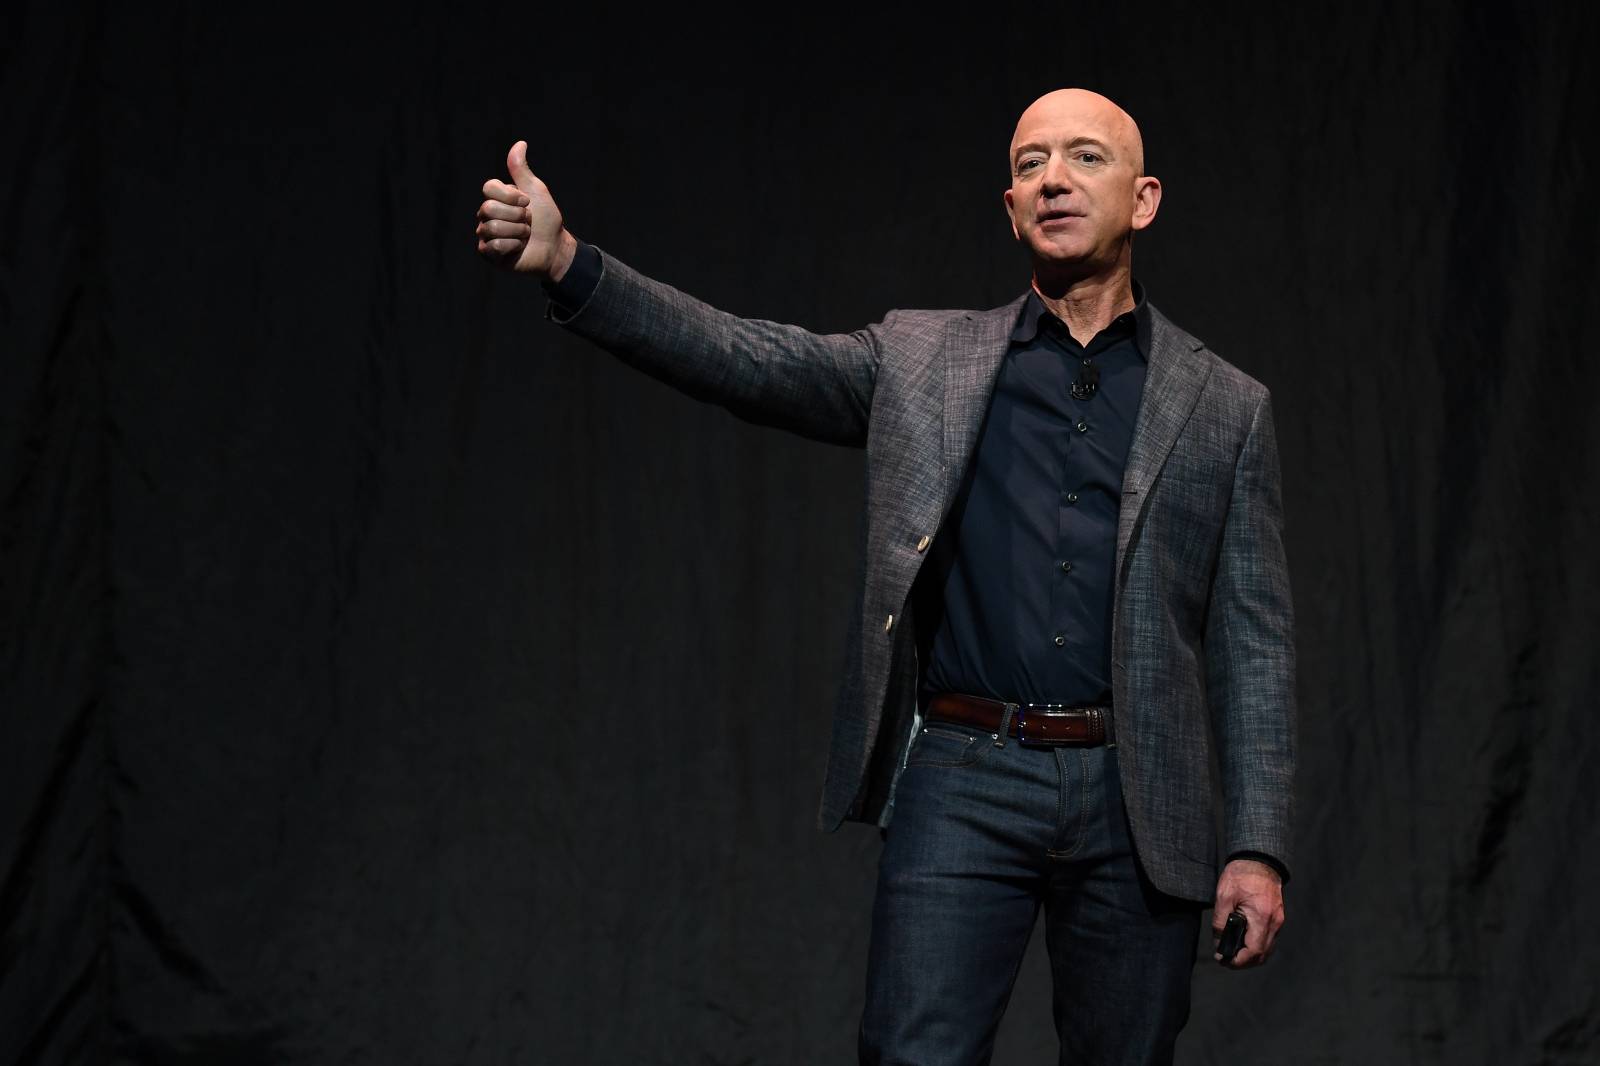 Founder, Chairman, CEO and President of Amazon Jeff Bezos gives a thumbs up as he speaks during an event about Blue Origin's space exploration plans in Washington